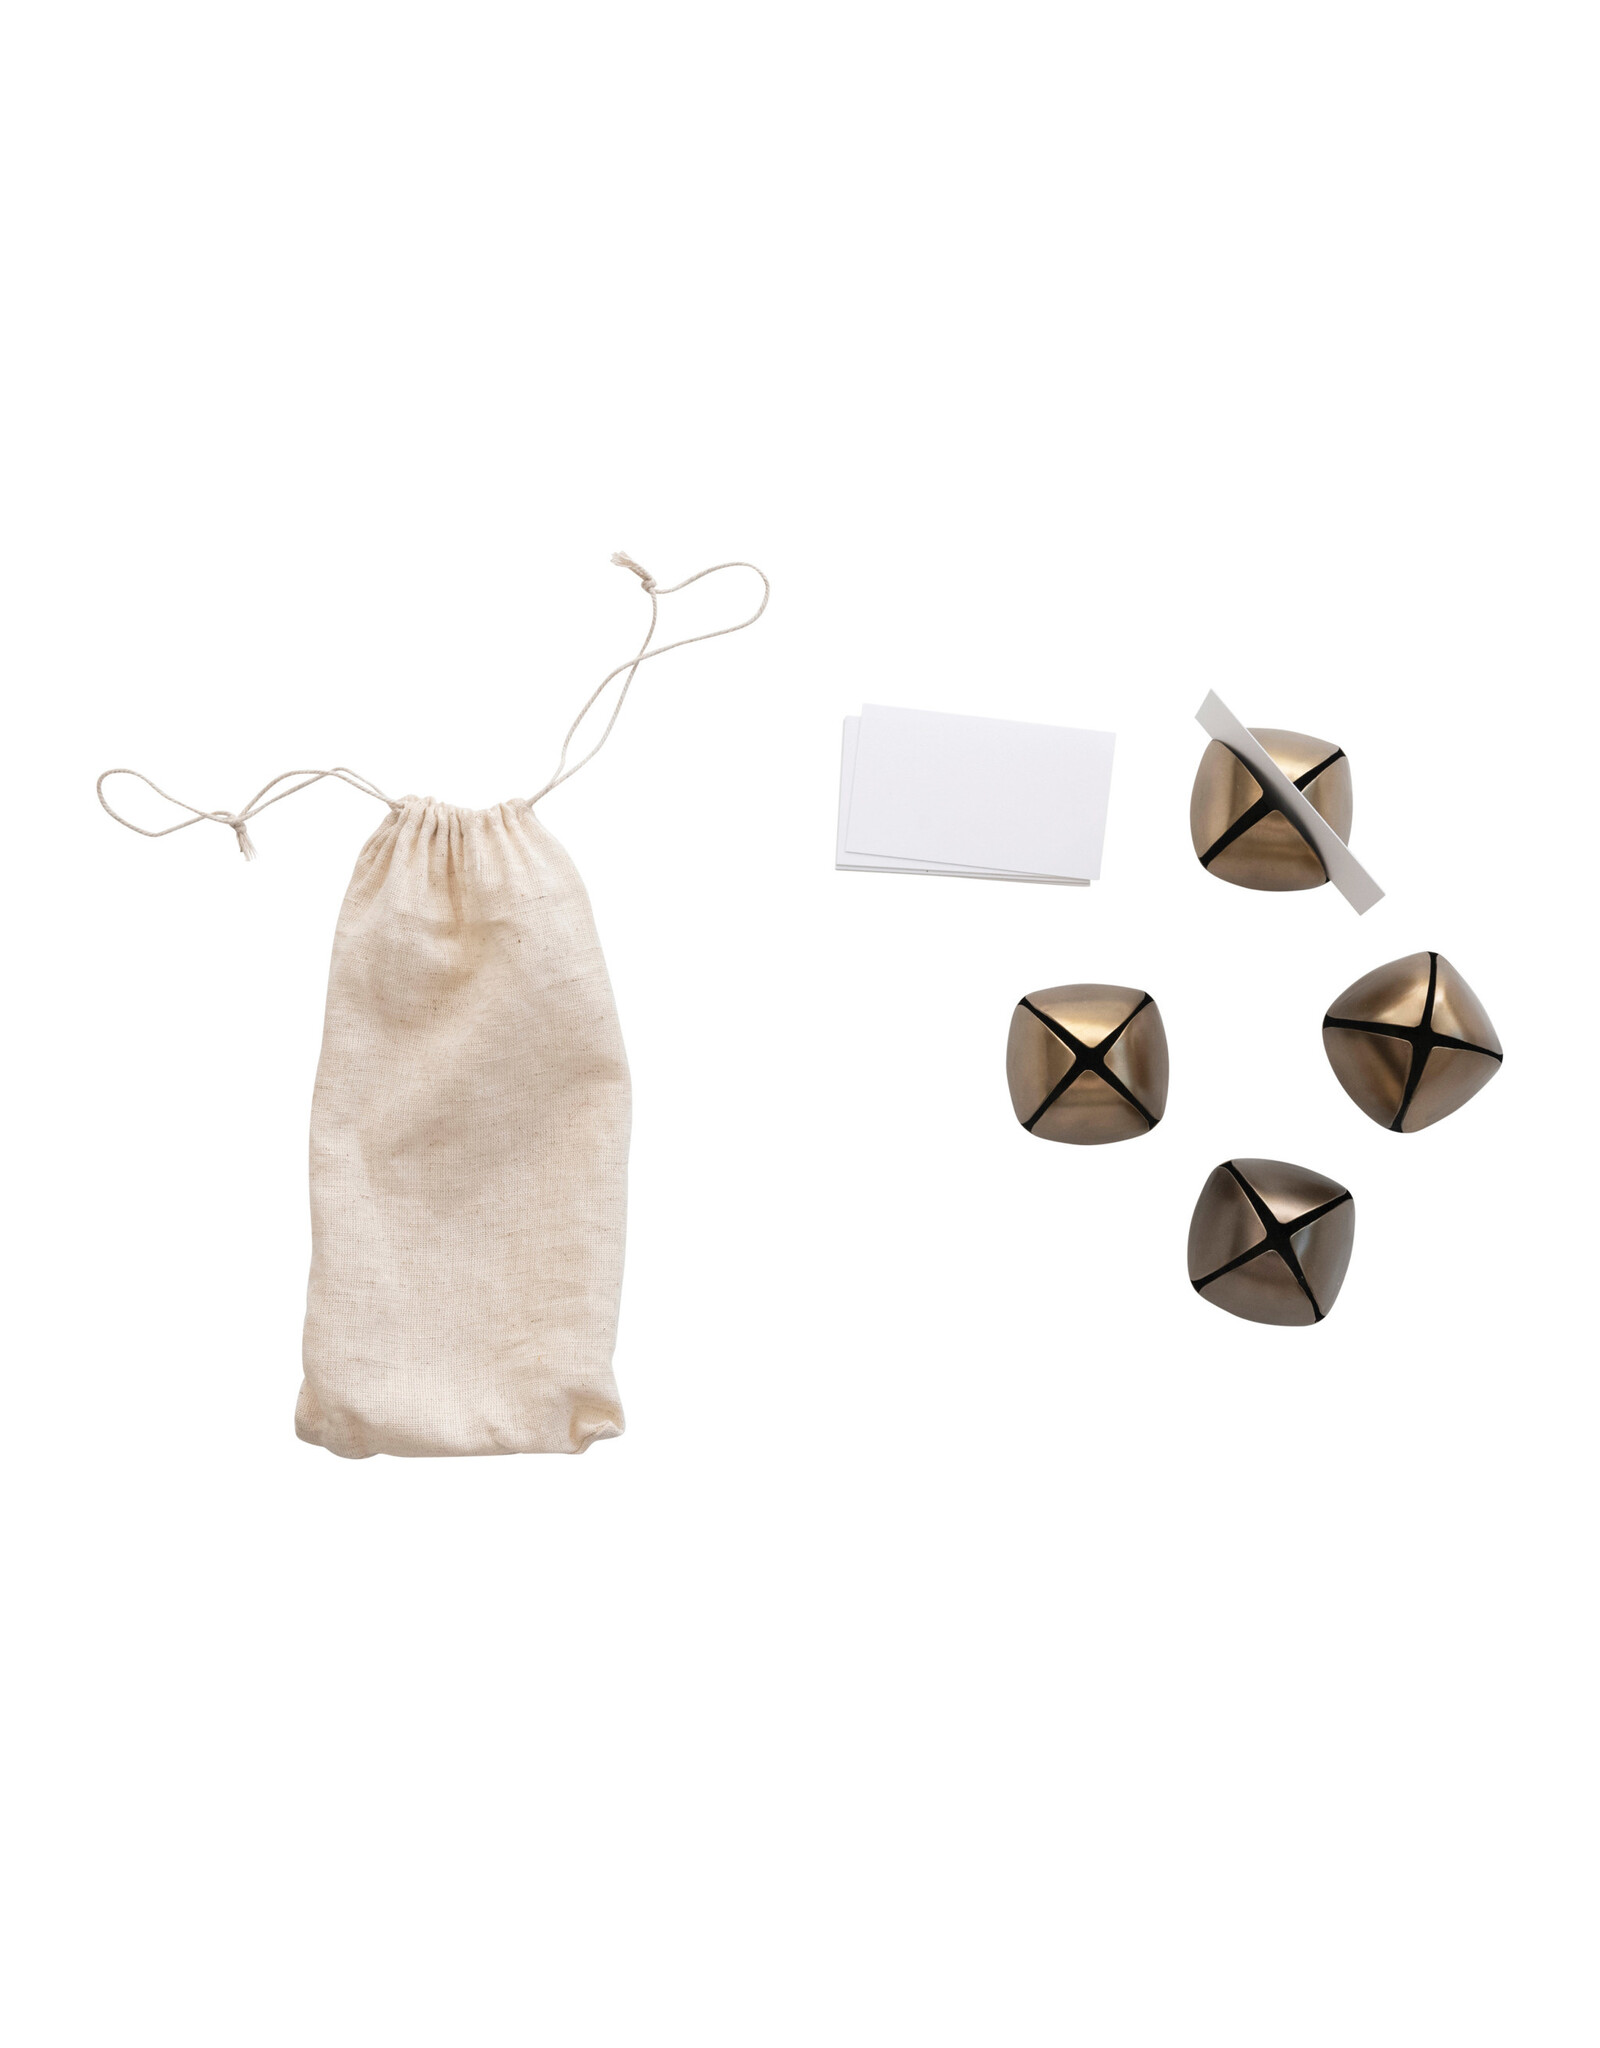 Metal Bell Place Card Holders, Set of 4 in Bag XM9854